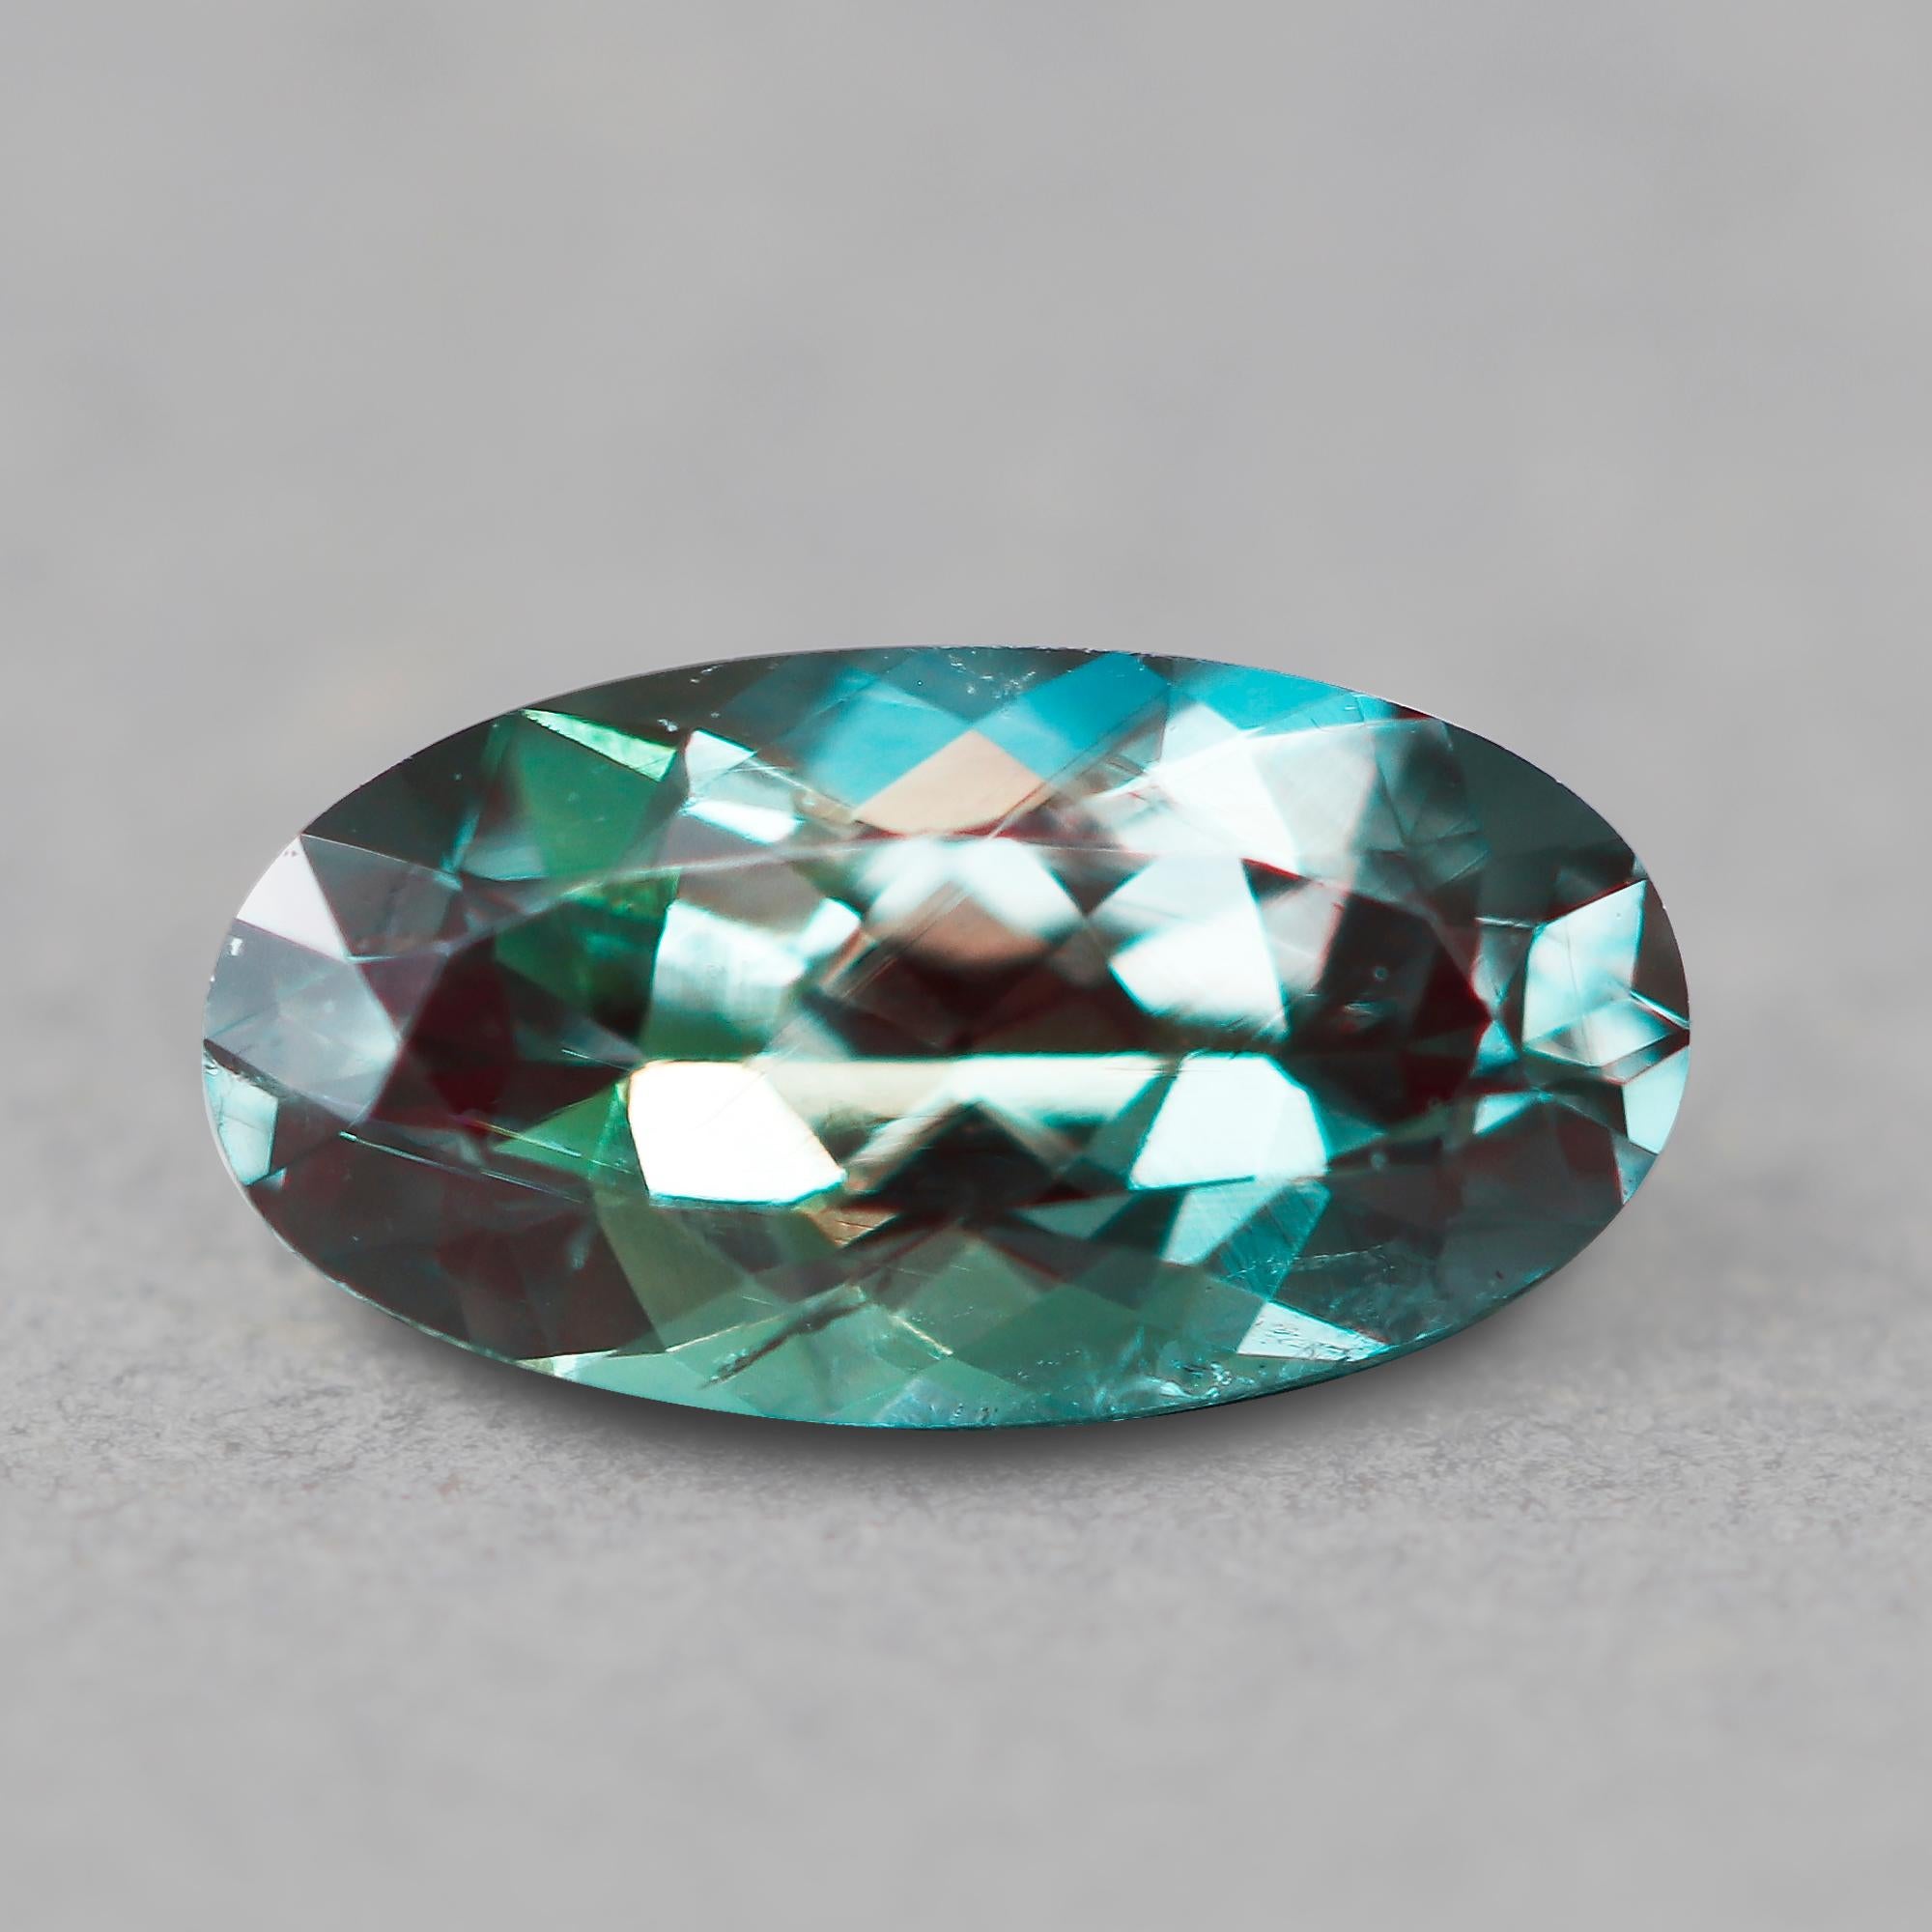 Introducing a captivating piece of nature's marvel, this exquisite listing showcases a mesmerizing 0.3 ct weight oval shape natural Russian Alexandrite. 

The natural Russian Alexandrite is renowned for its remarkable color-changing properties,